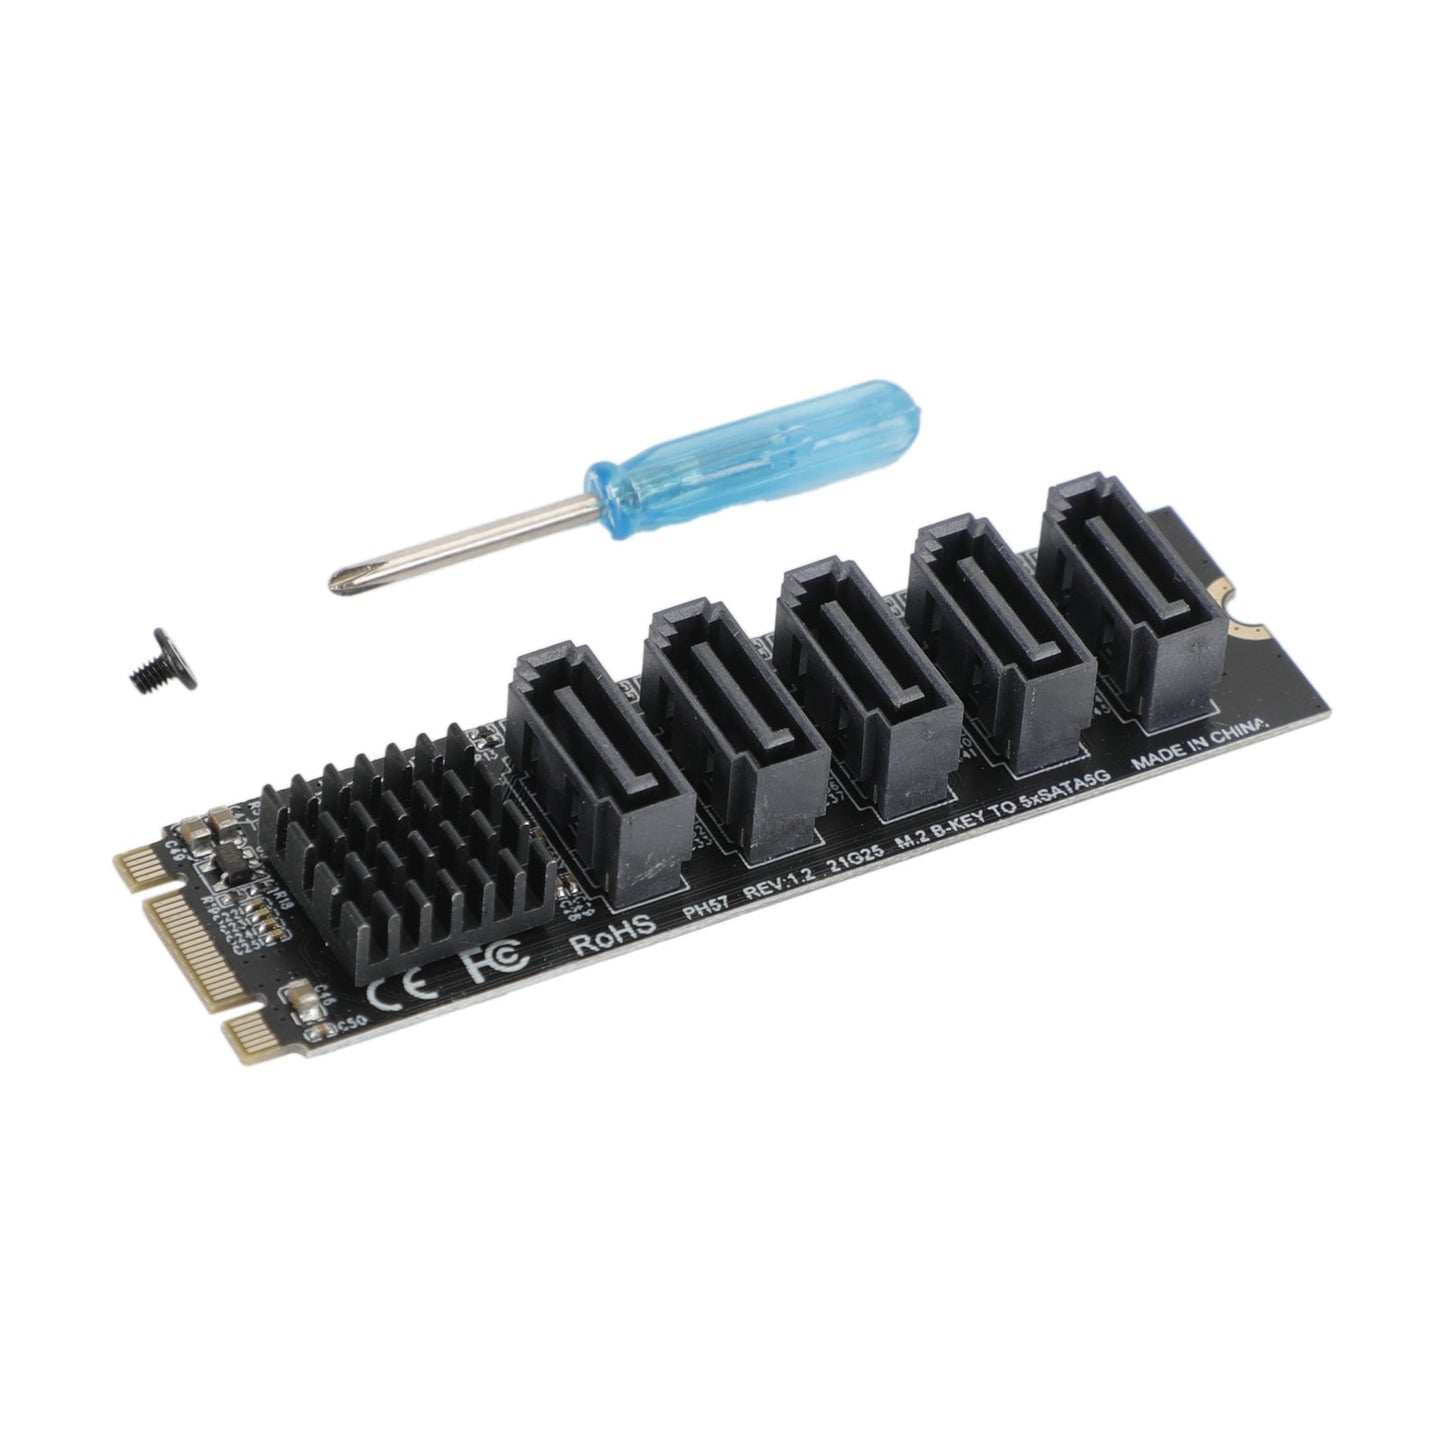 M.2 To SATA 3.0 Adapter JMB585 5 Port Hard Disk Drive Expansion Card for PH56